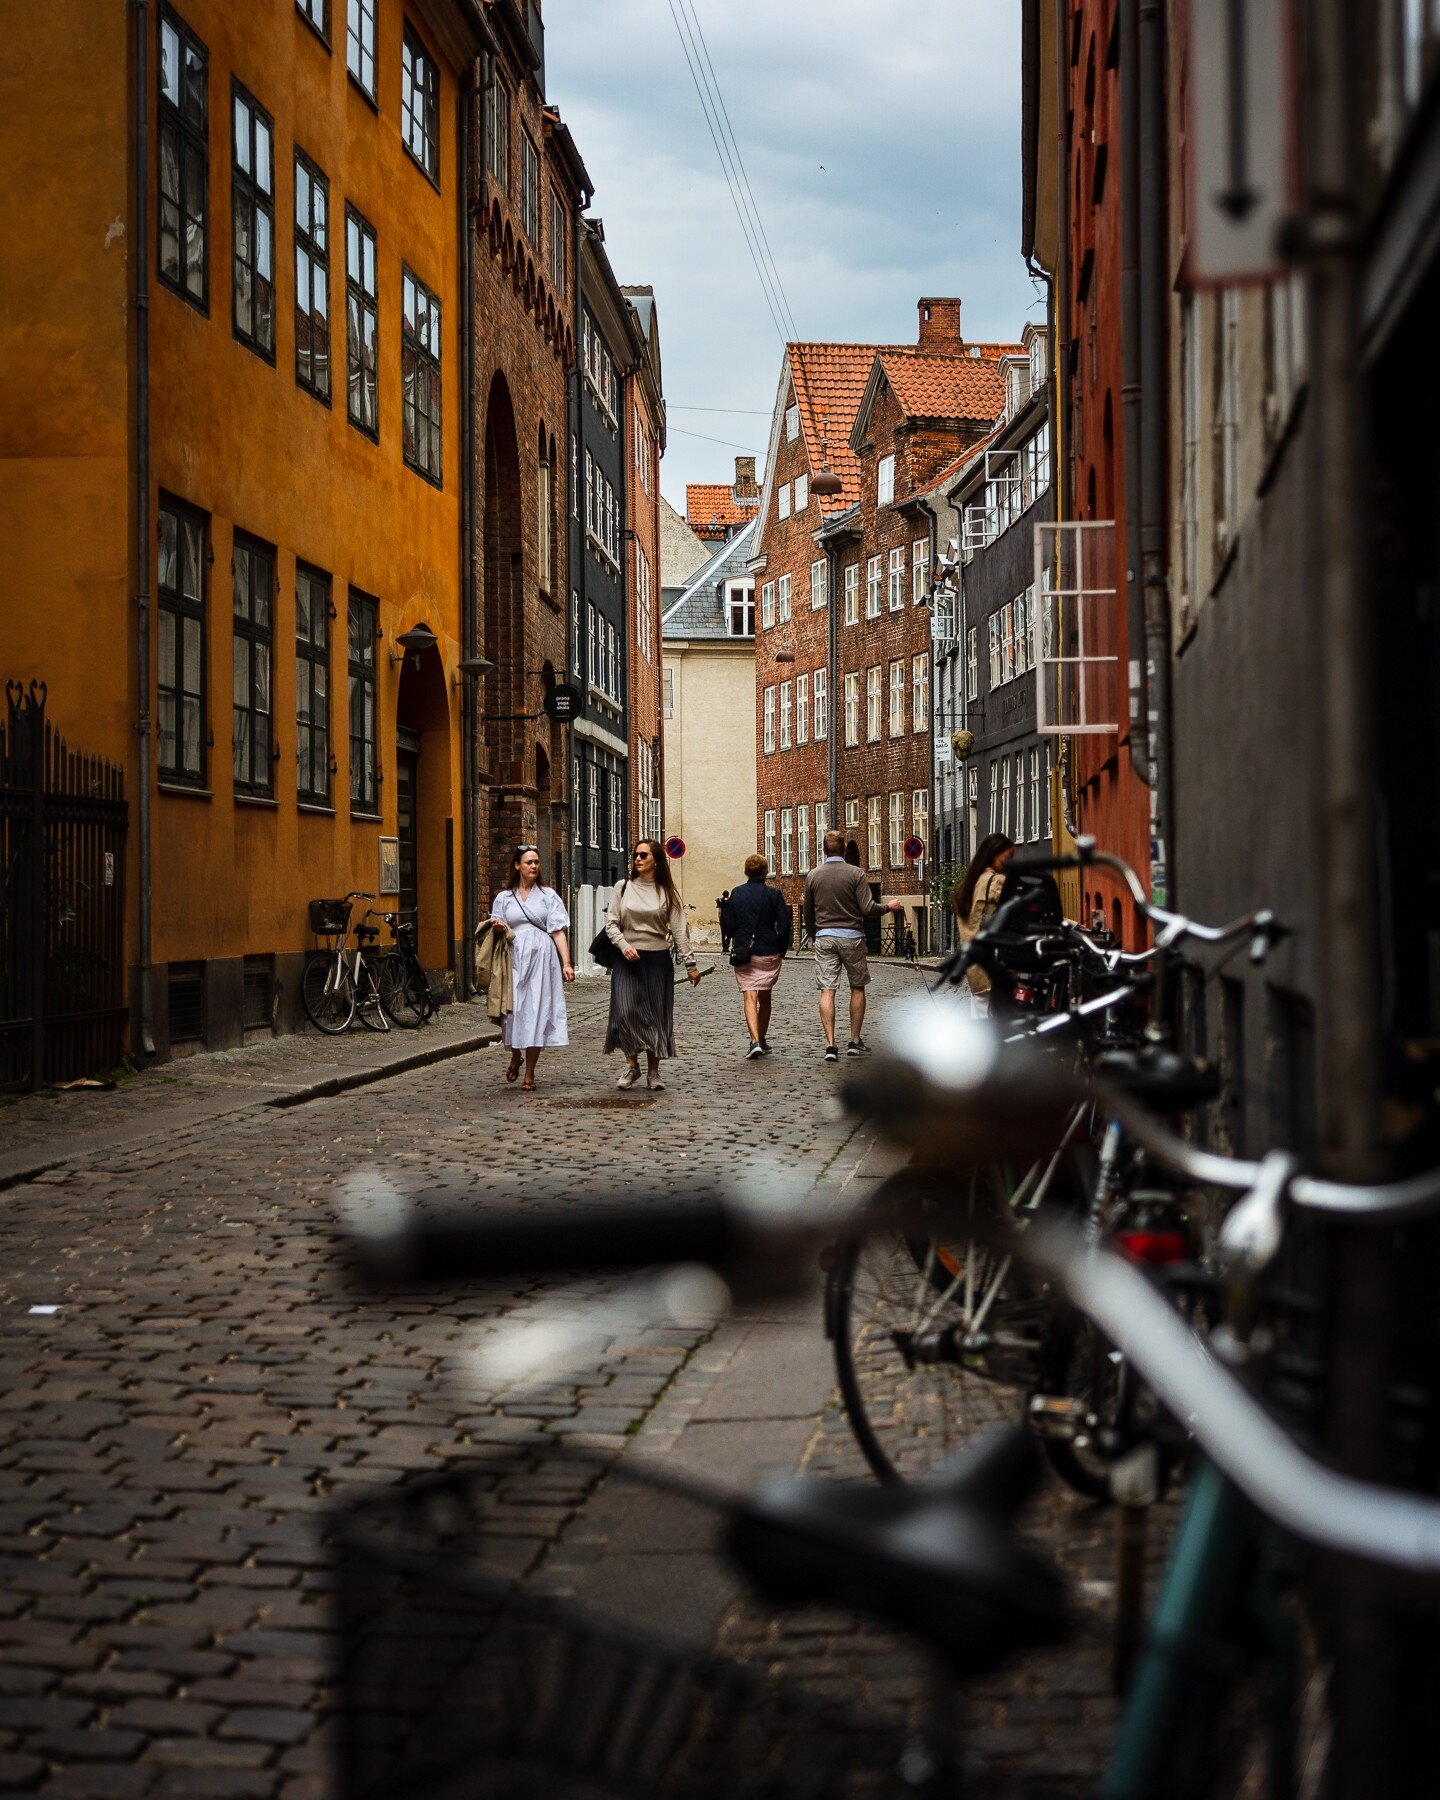 Another swipey swipe, a must see street in Copenhagen and around the corner from this an impromptu invite to join a photoshoot, a guard on patrol, father and son taking in Roskilde Cathedral, hip shot in the metro anddd somehow a relatively quiet tou